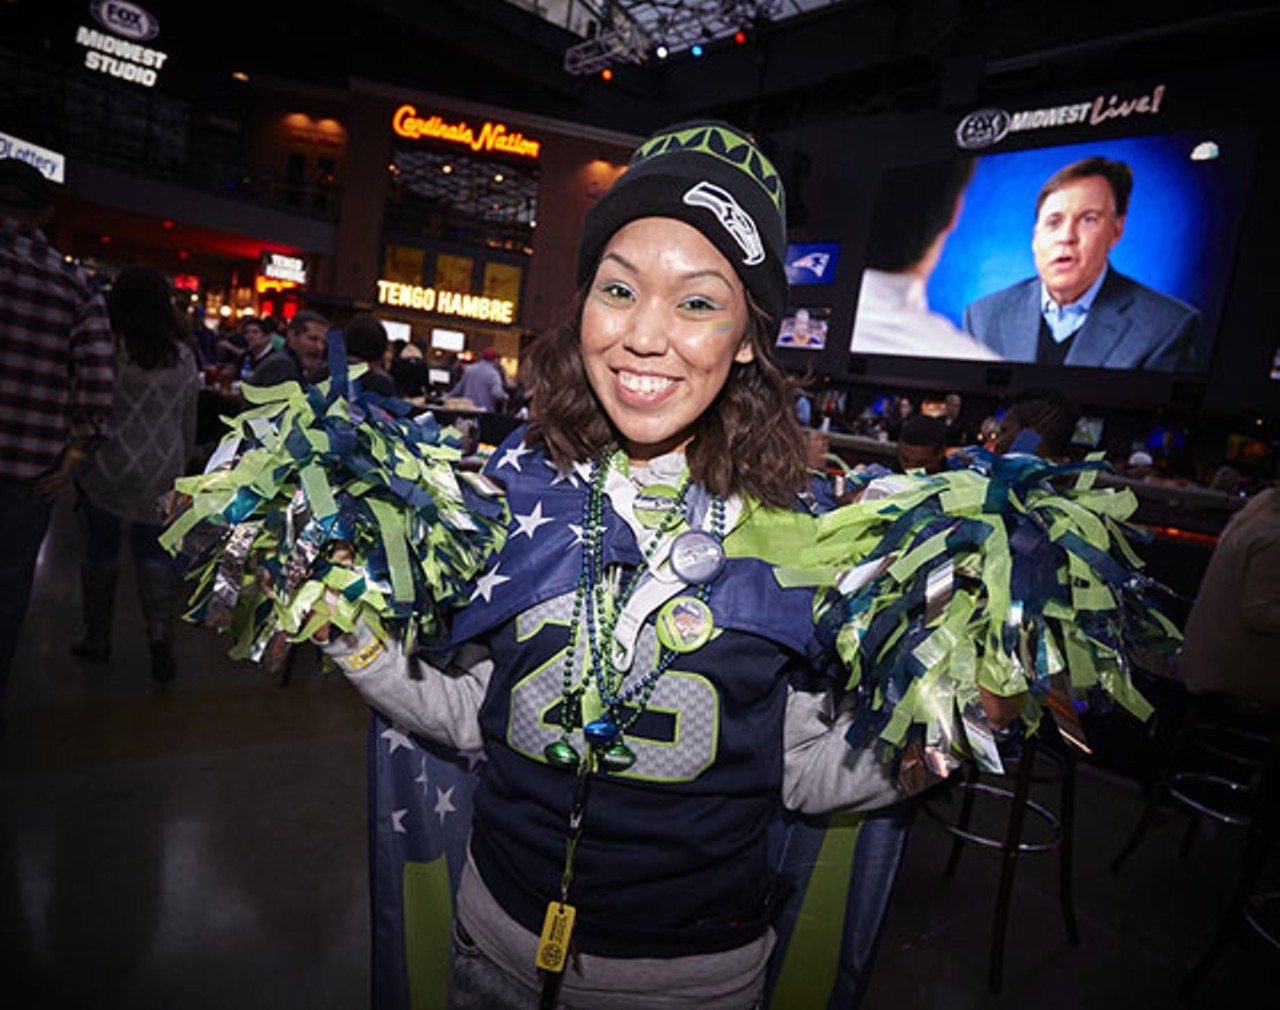 Marcy Williams, originally from Seattle, came from O'Fallon Illinois to support the Seahawks.